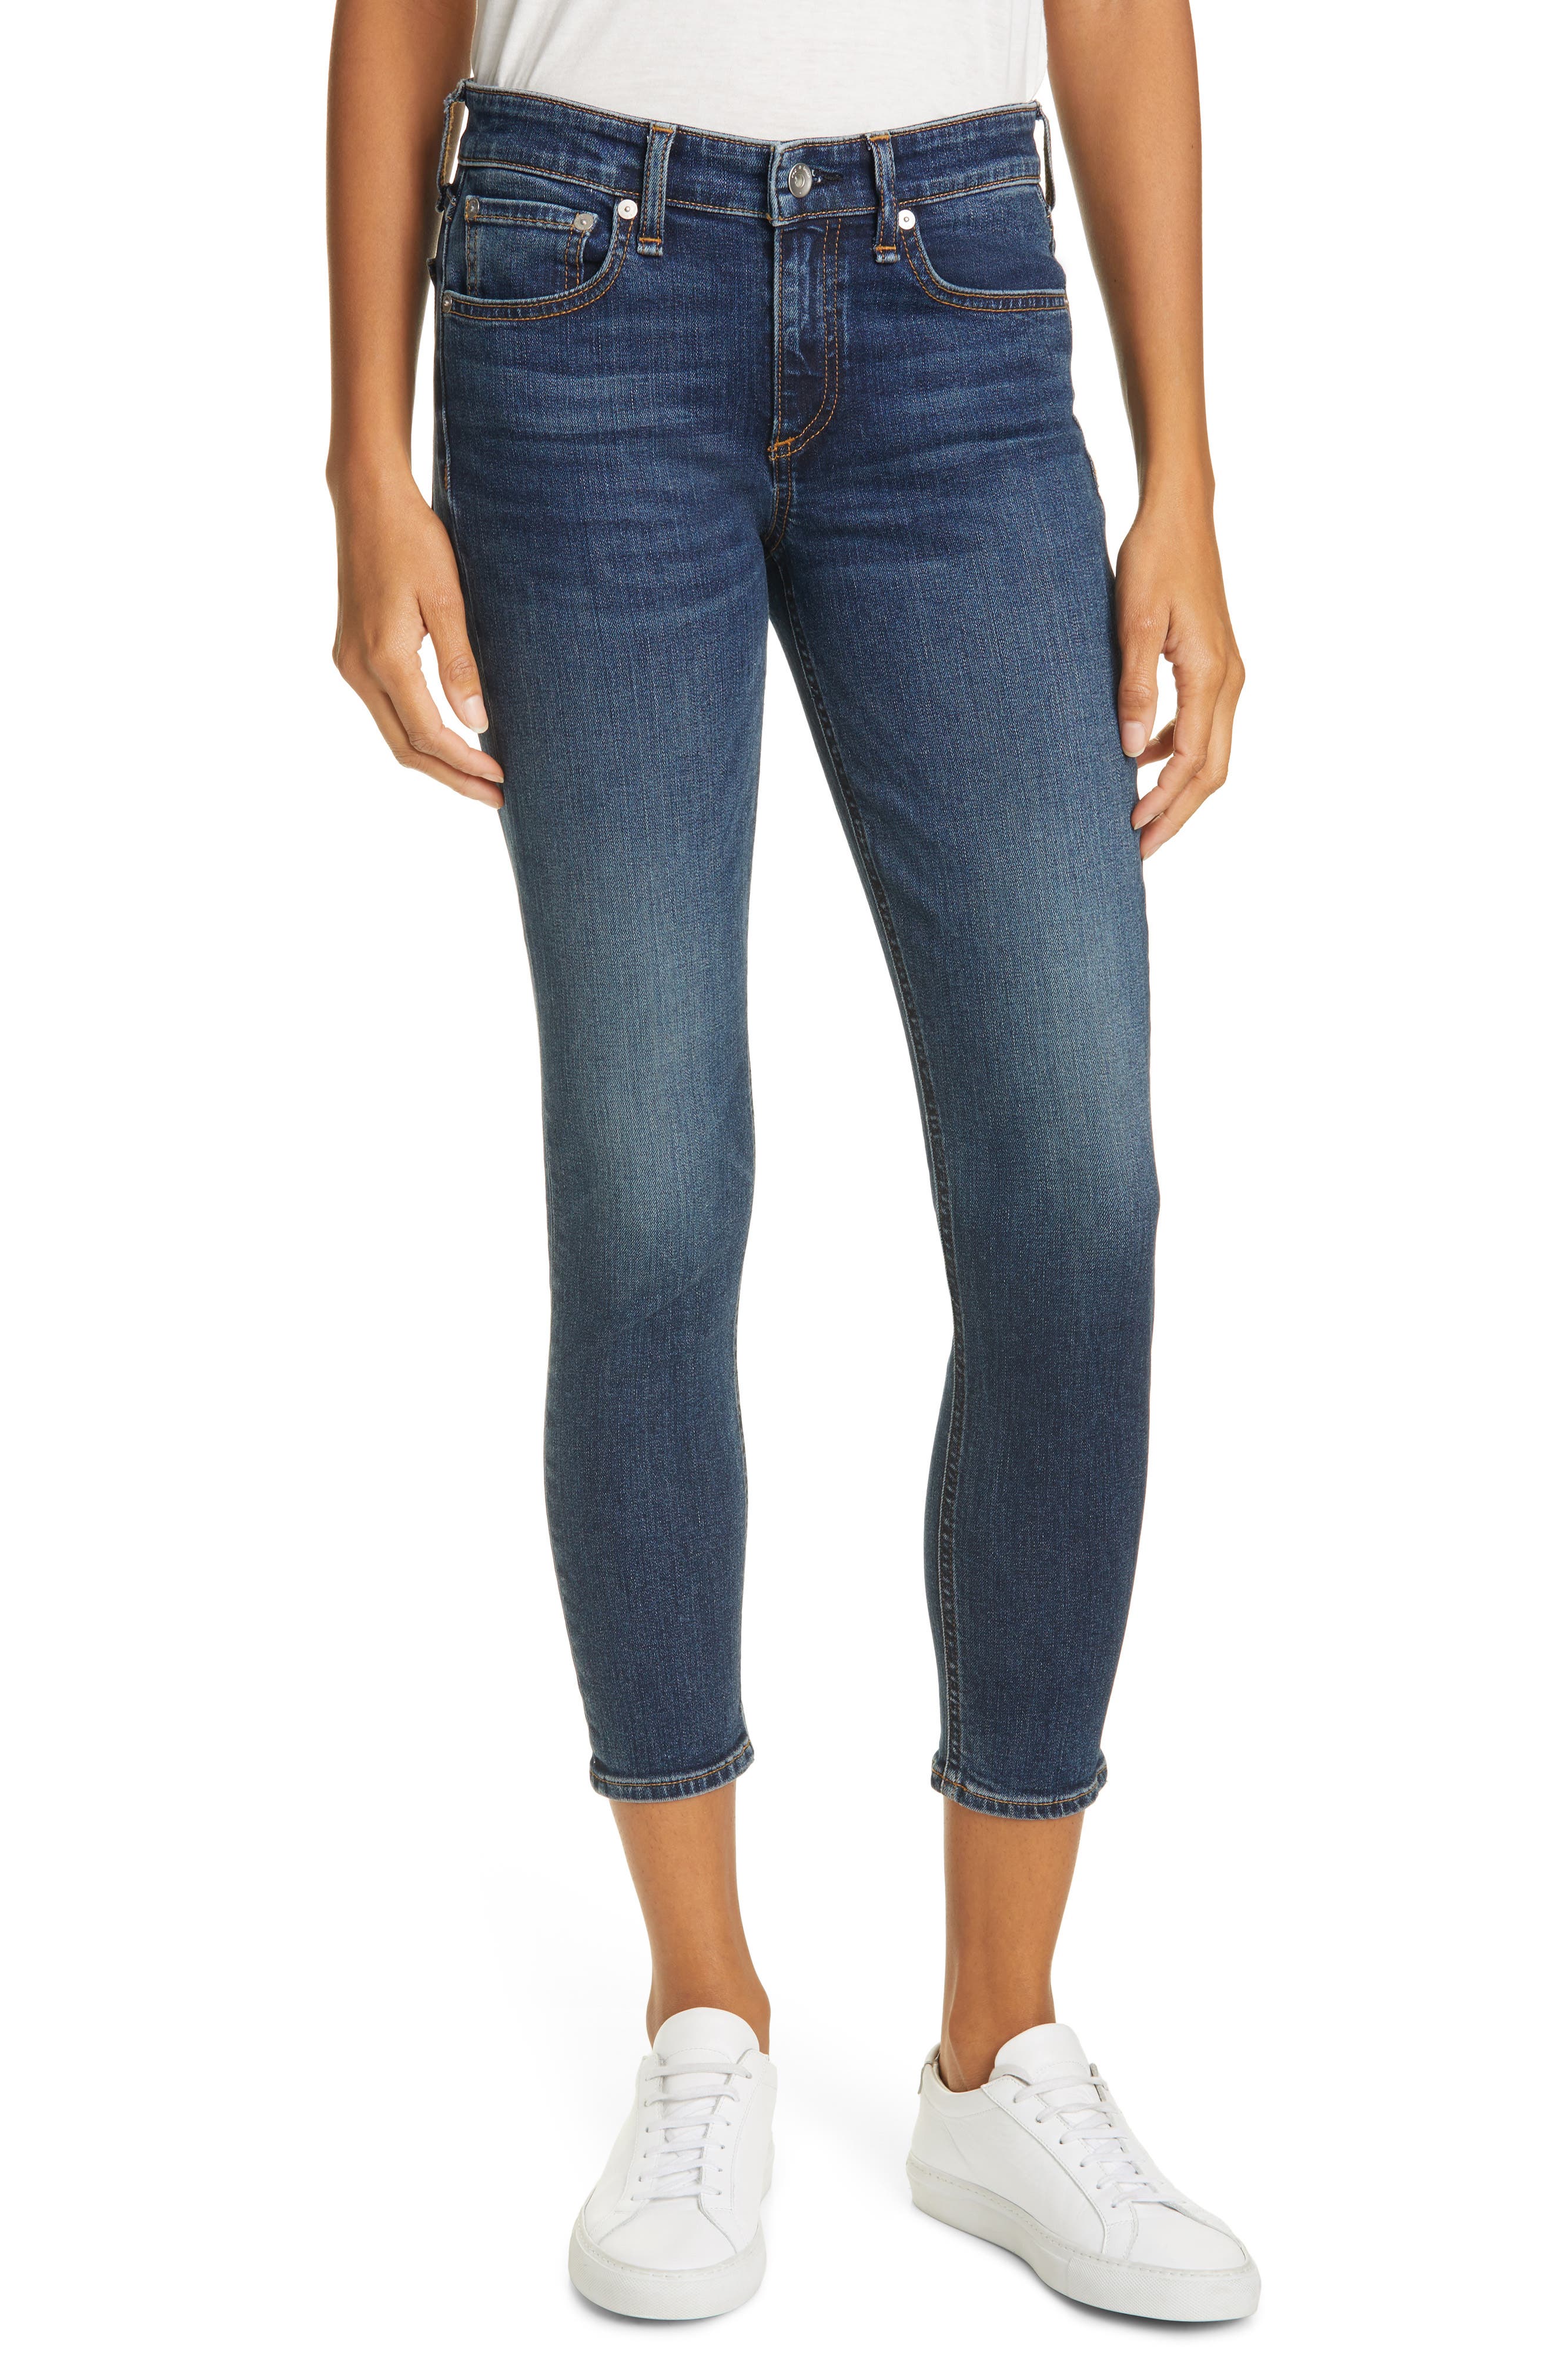 oasis lily coated jeans